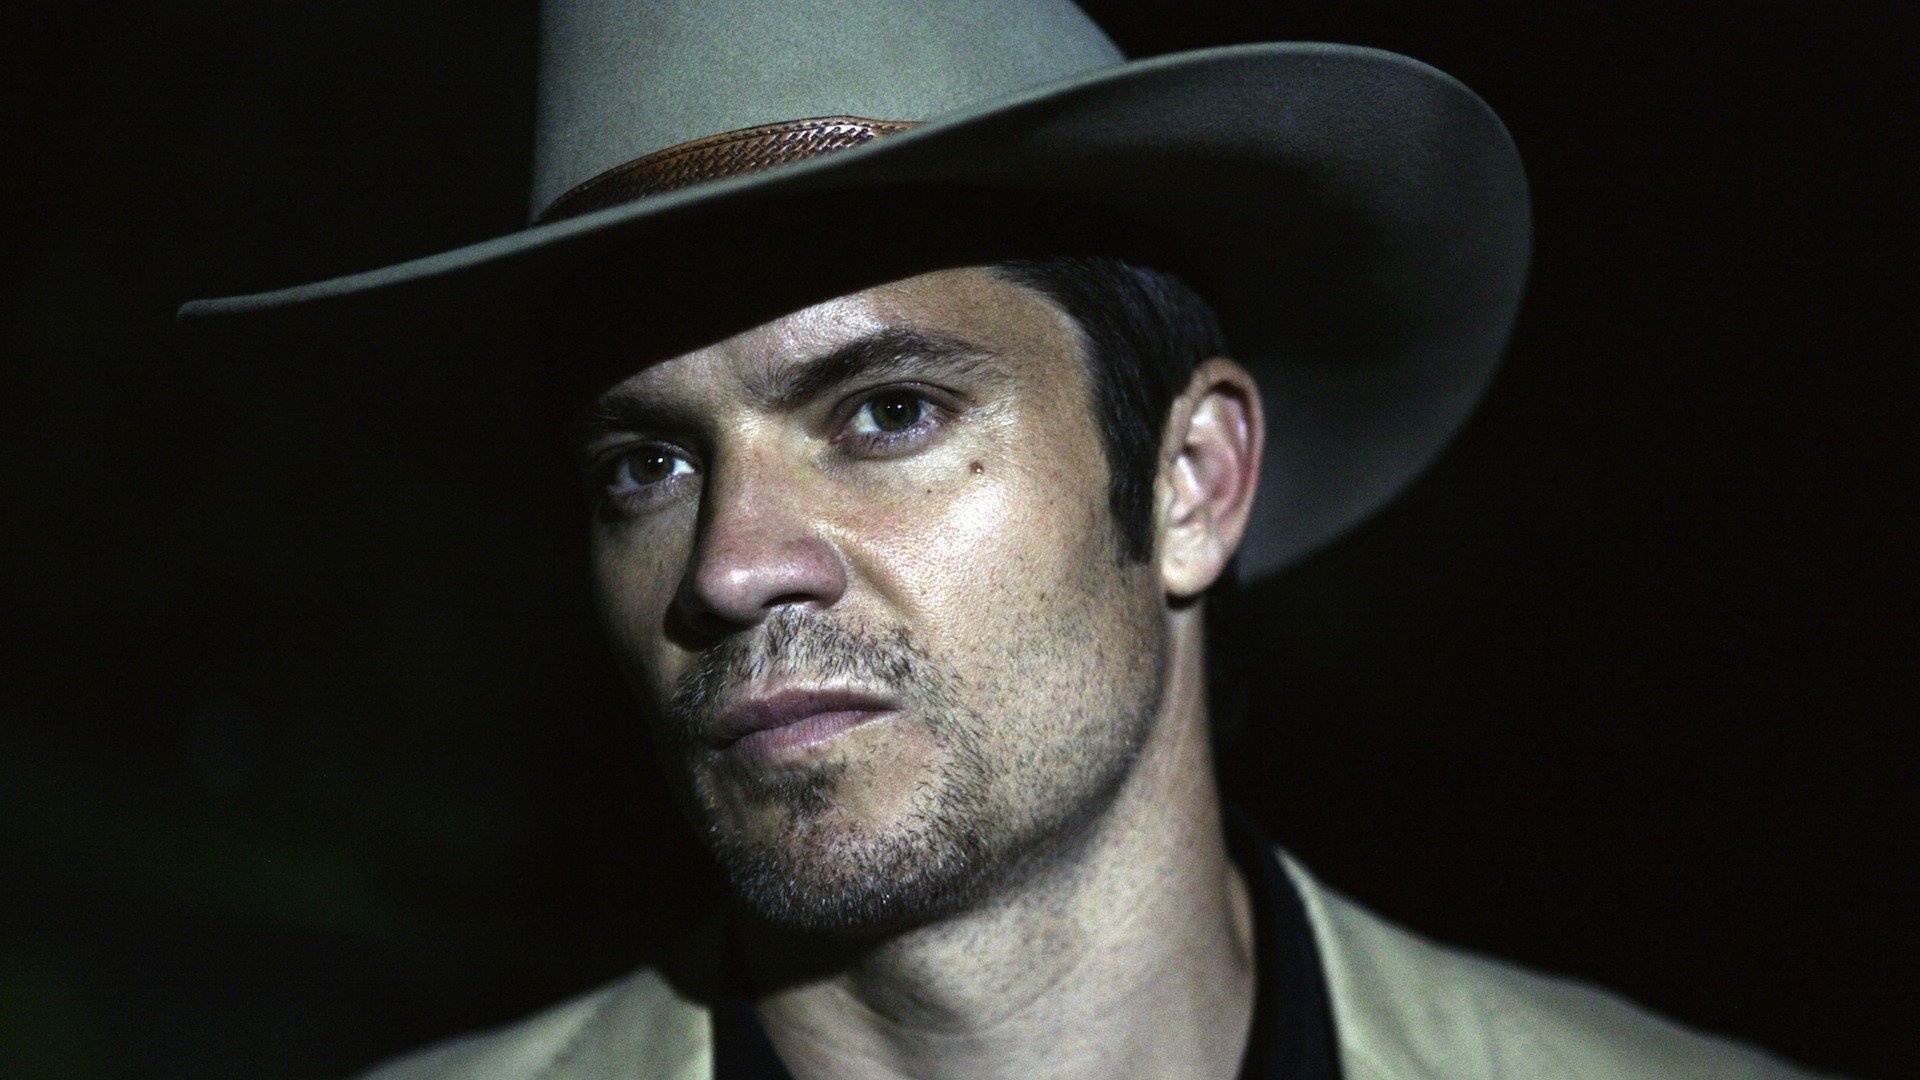 Justified TV Series, Gritty action, Lawman's pursuit, Criminal justice, 1920x1080 Full HD Desktop